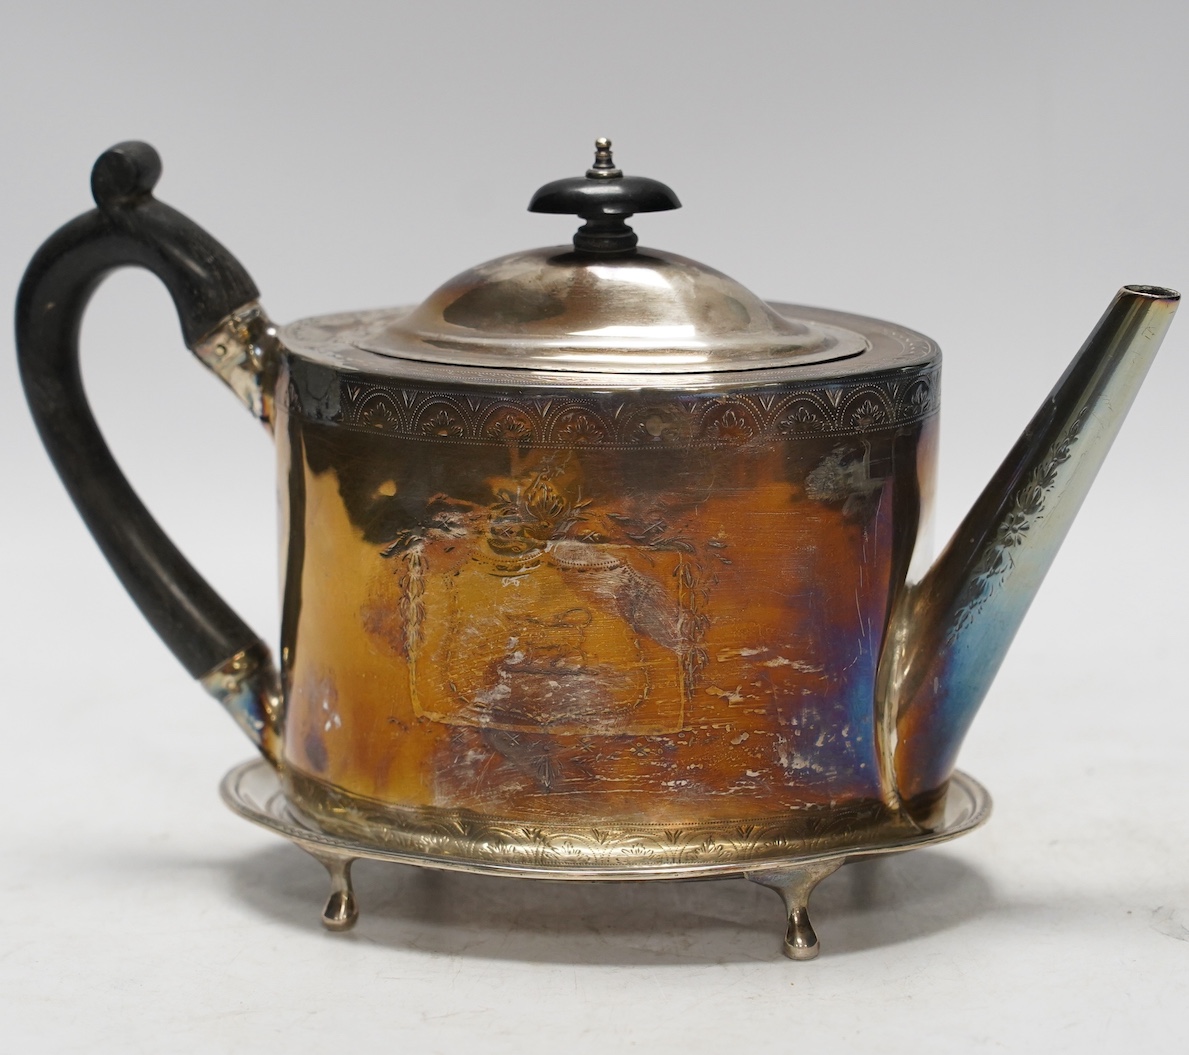 A George III engraved silver oval teapot, Cornelius Bland, London, 1791(poor condition), together with an associated oval stand (fair condition), Soloman Hougham, London, 1797, 16.2cm, gross 16oz.